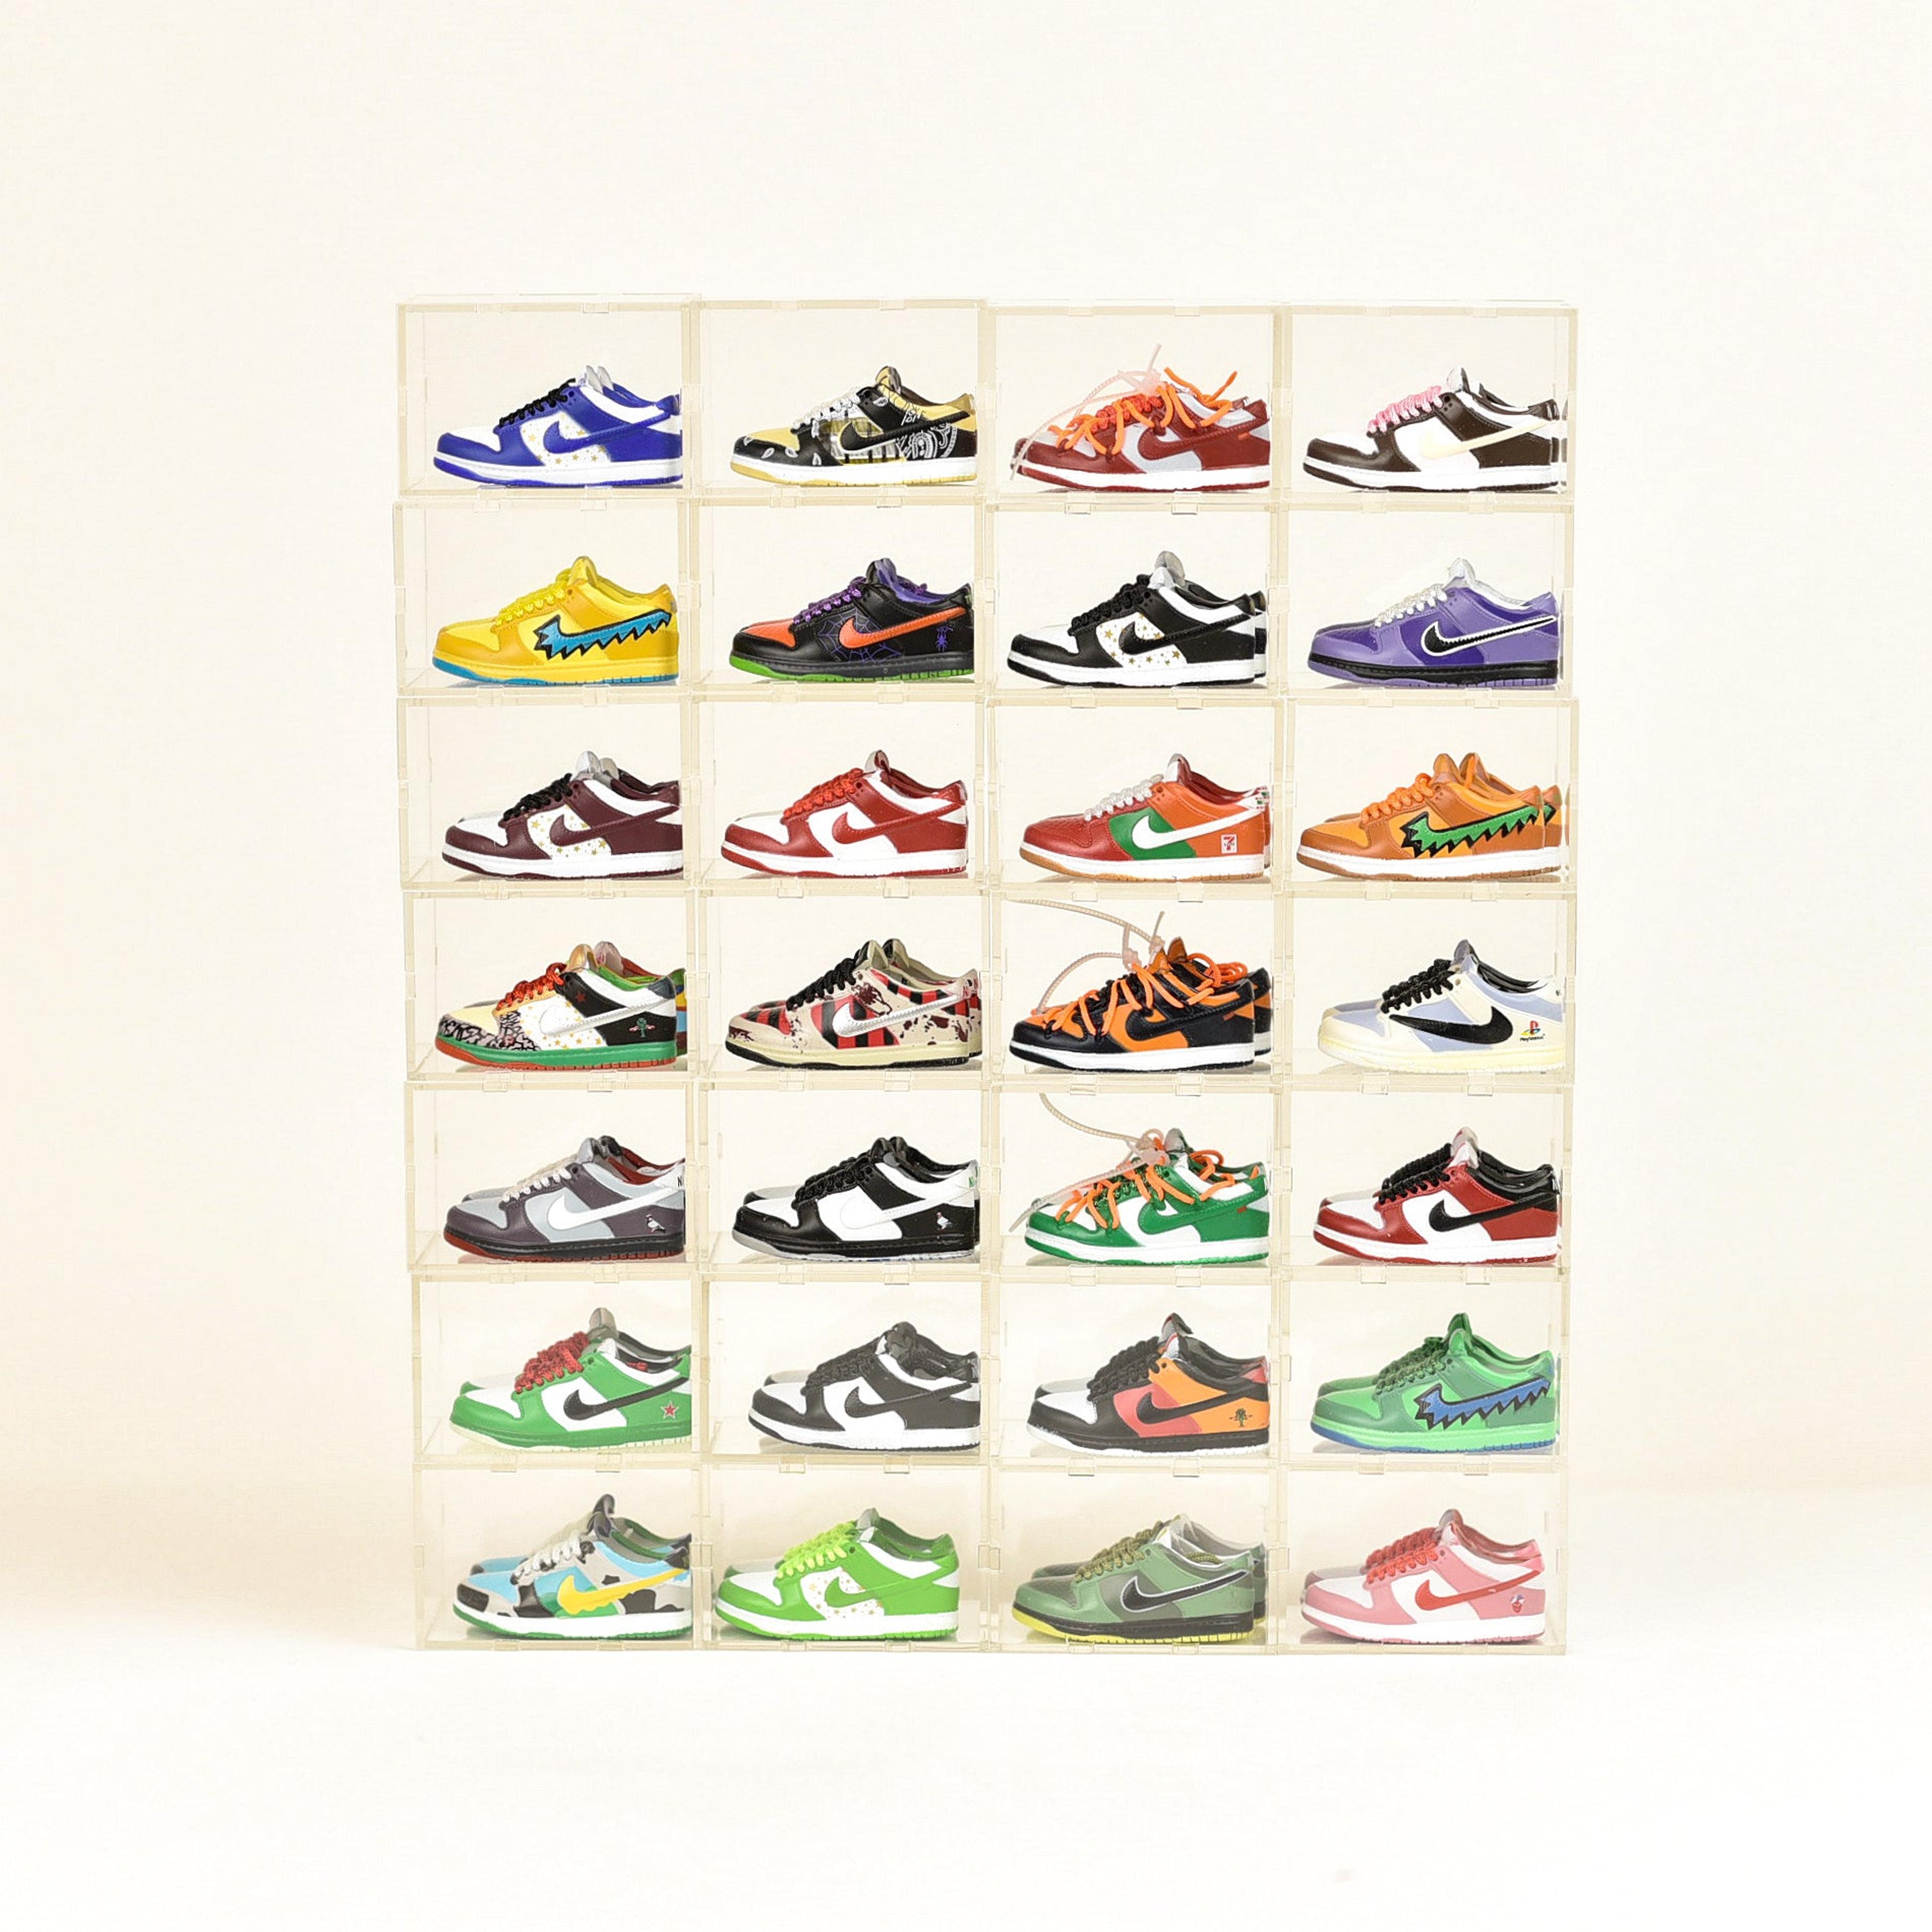 SB Dunk Low Collaboration Mini Sneakers with Display Case